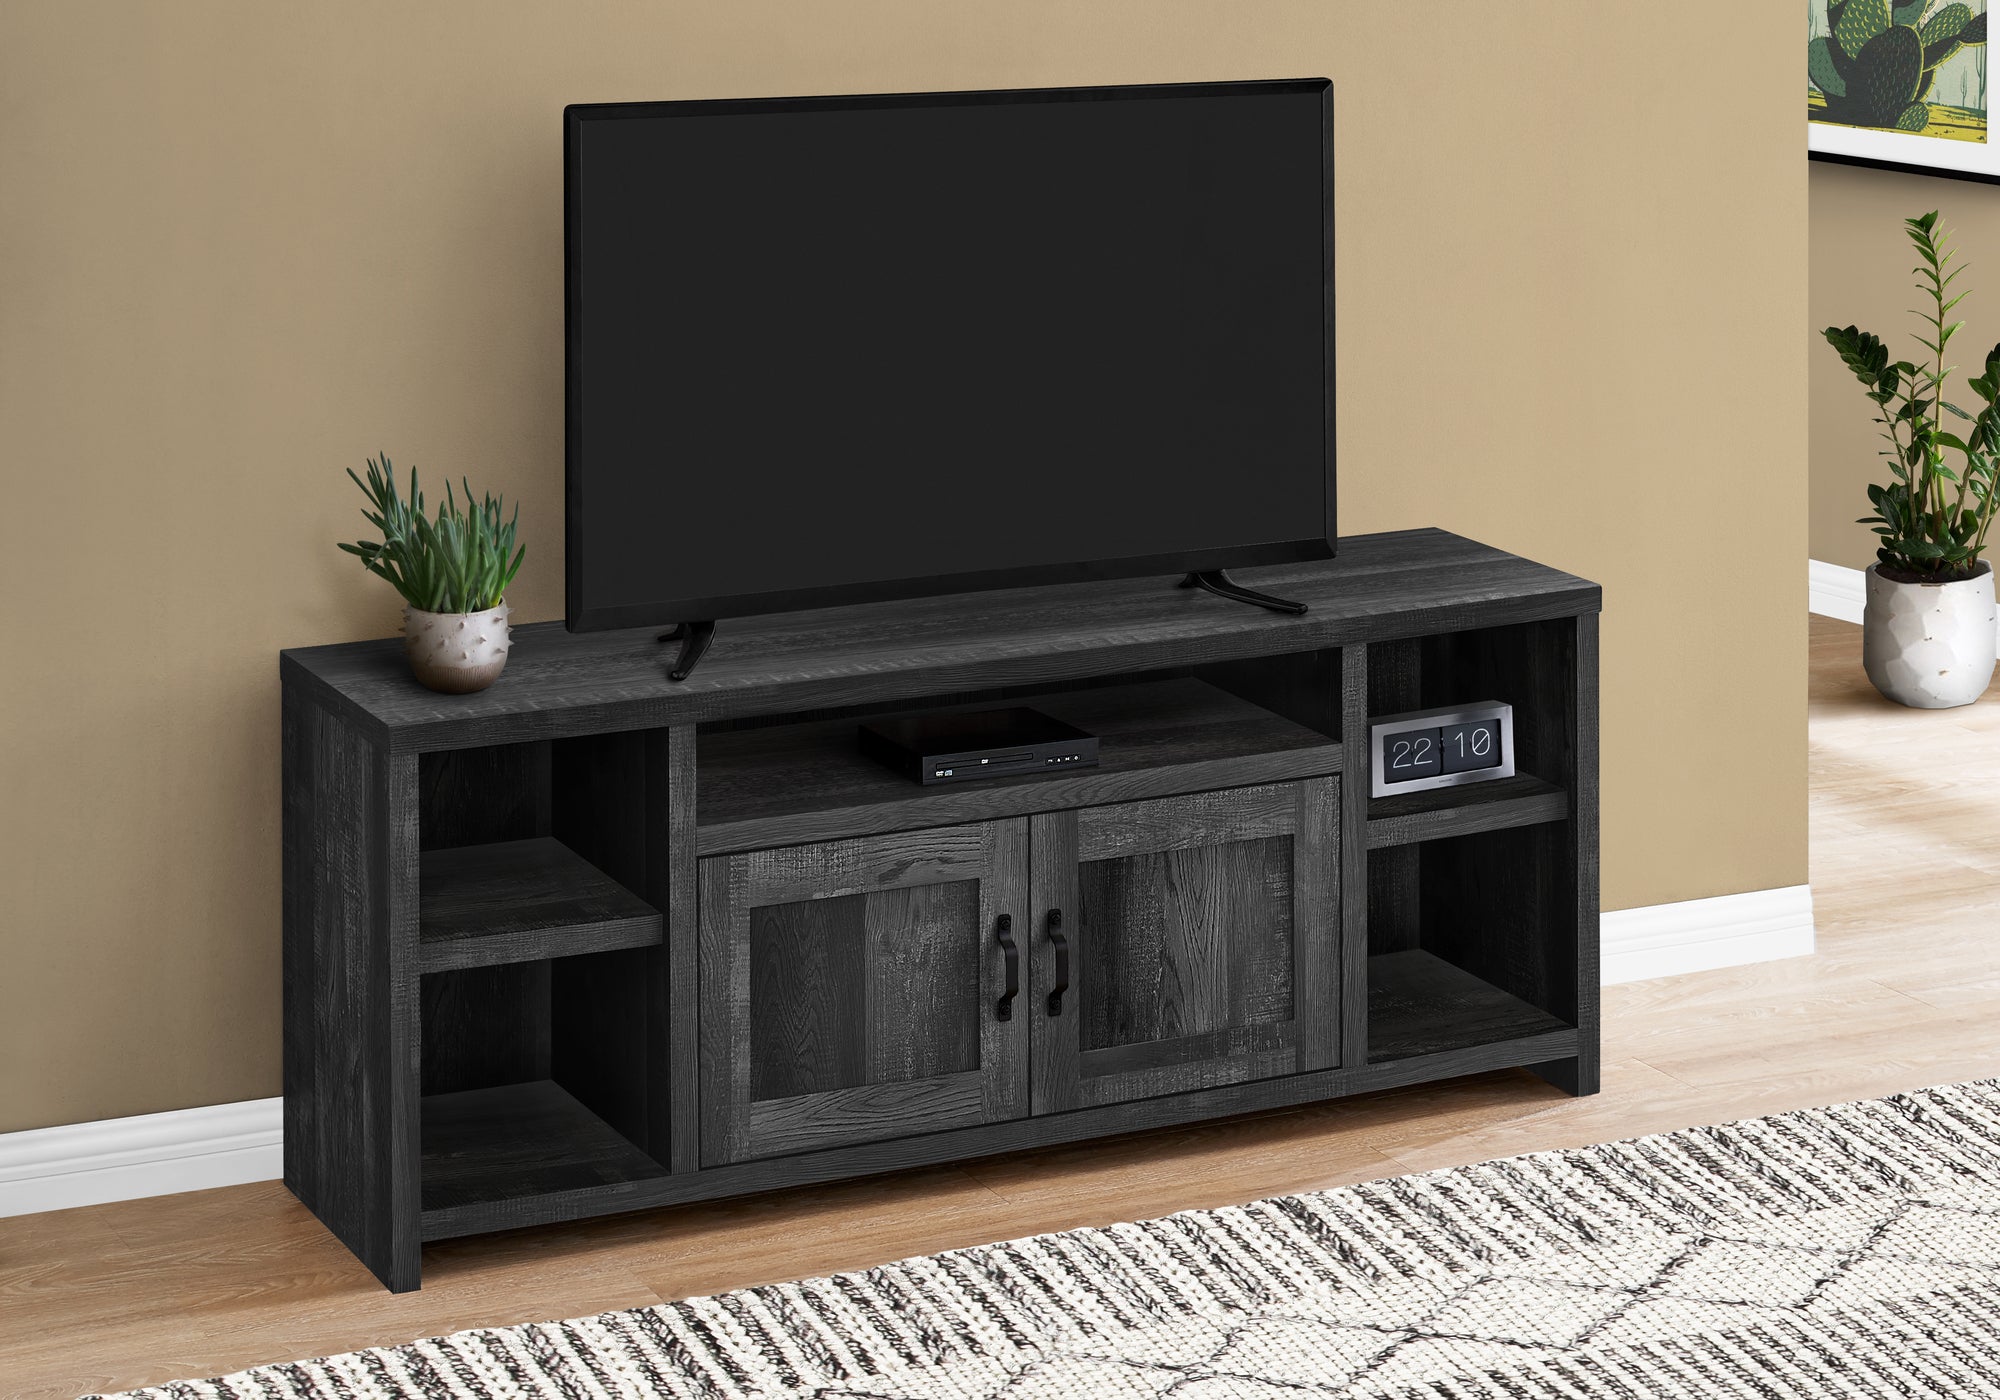 TV Stand - 60"L / Black Reclaimed Wood-Look